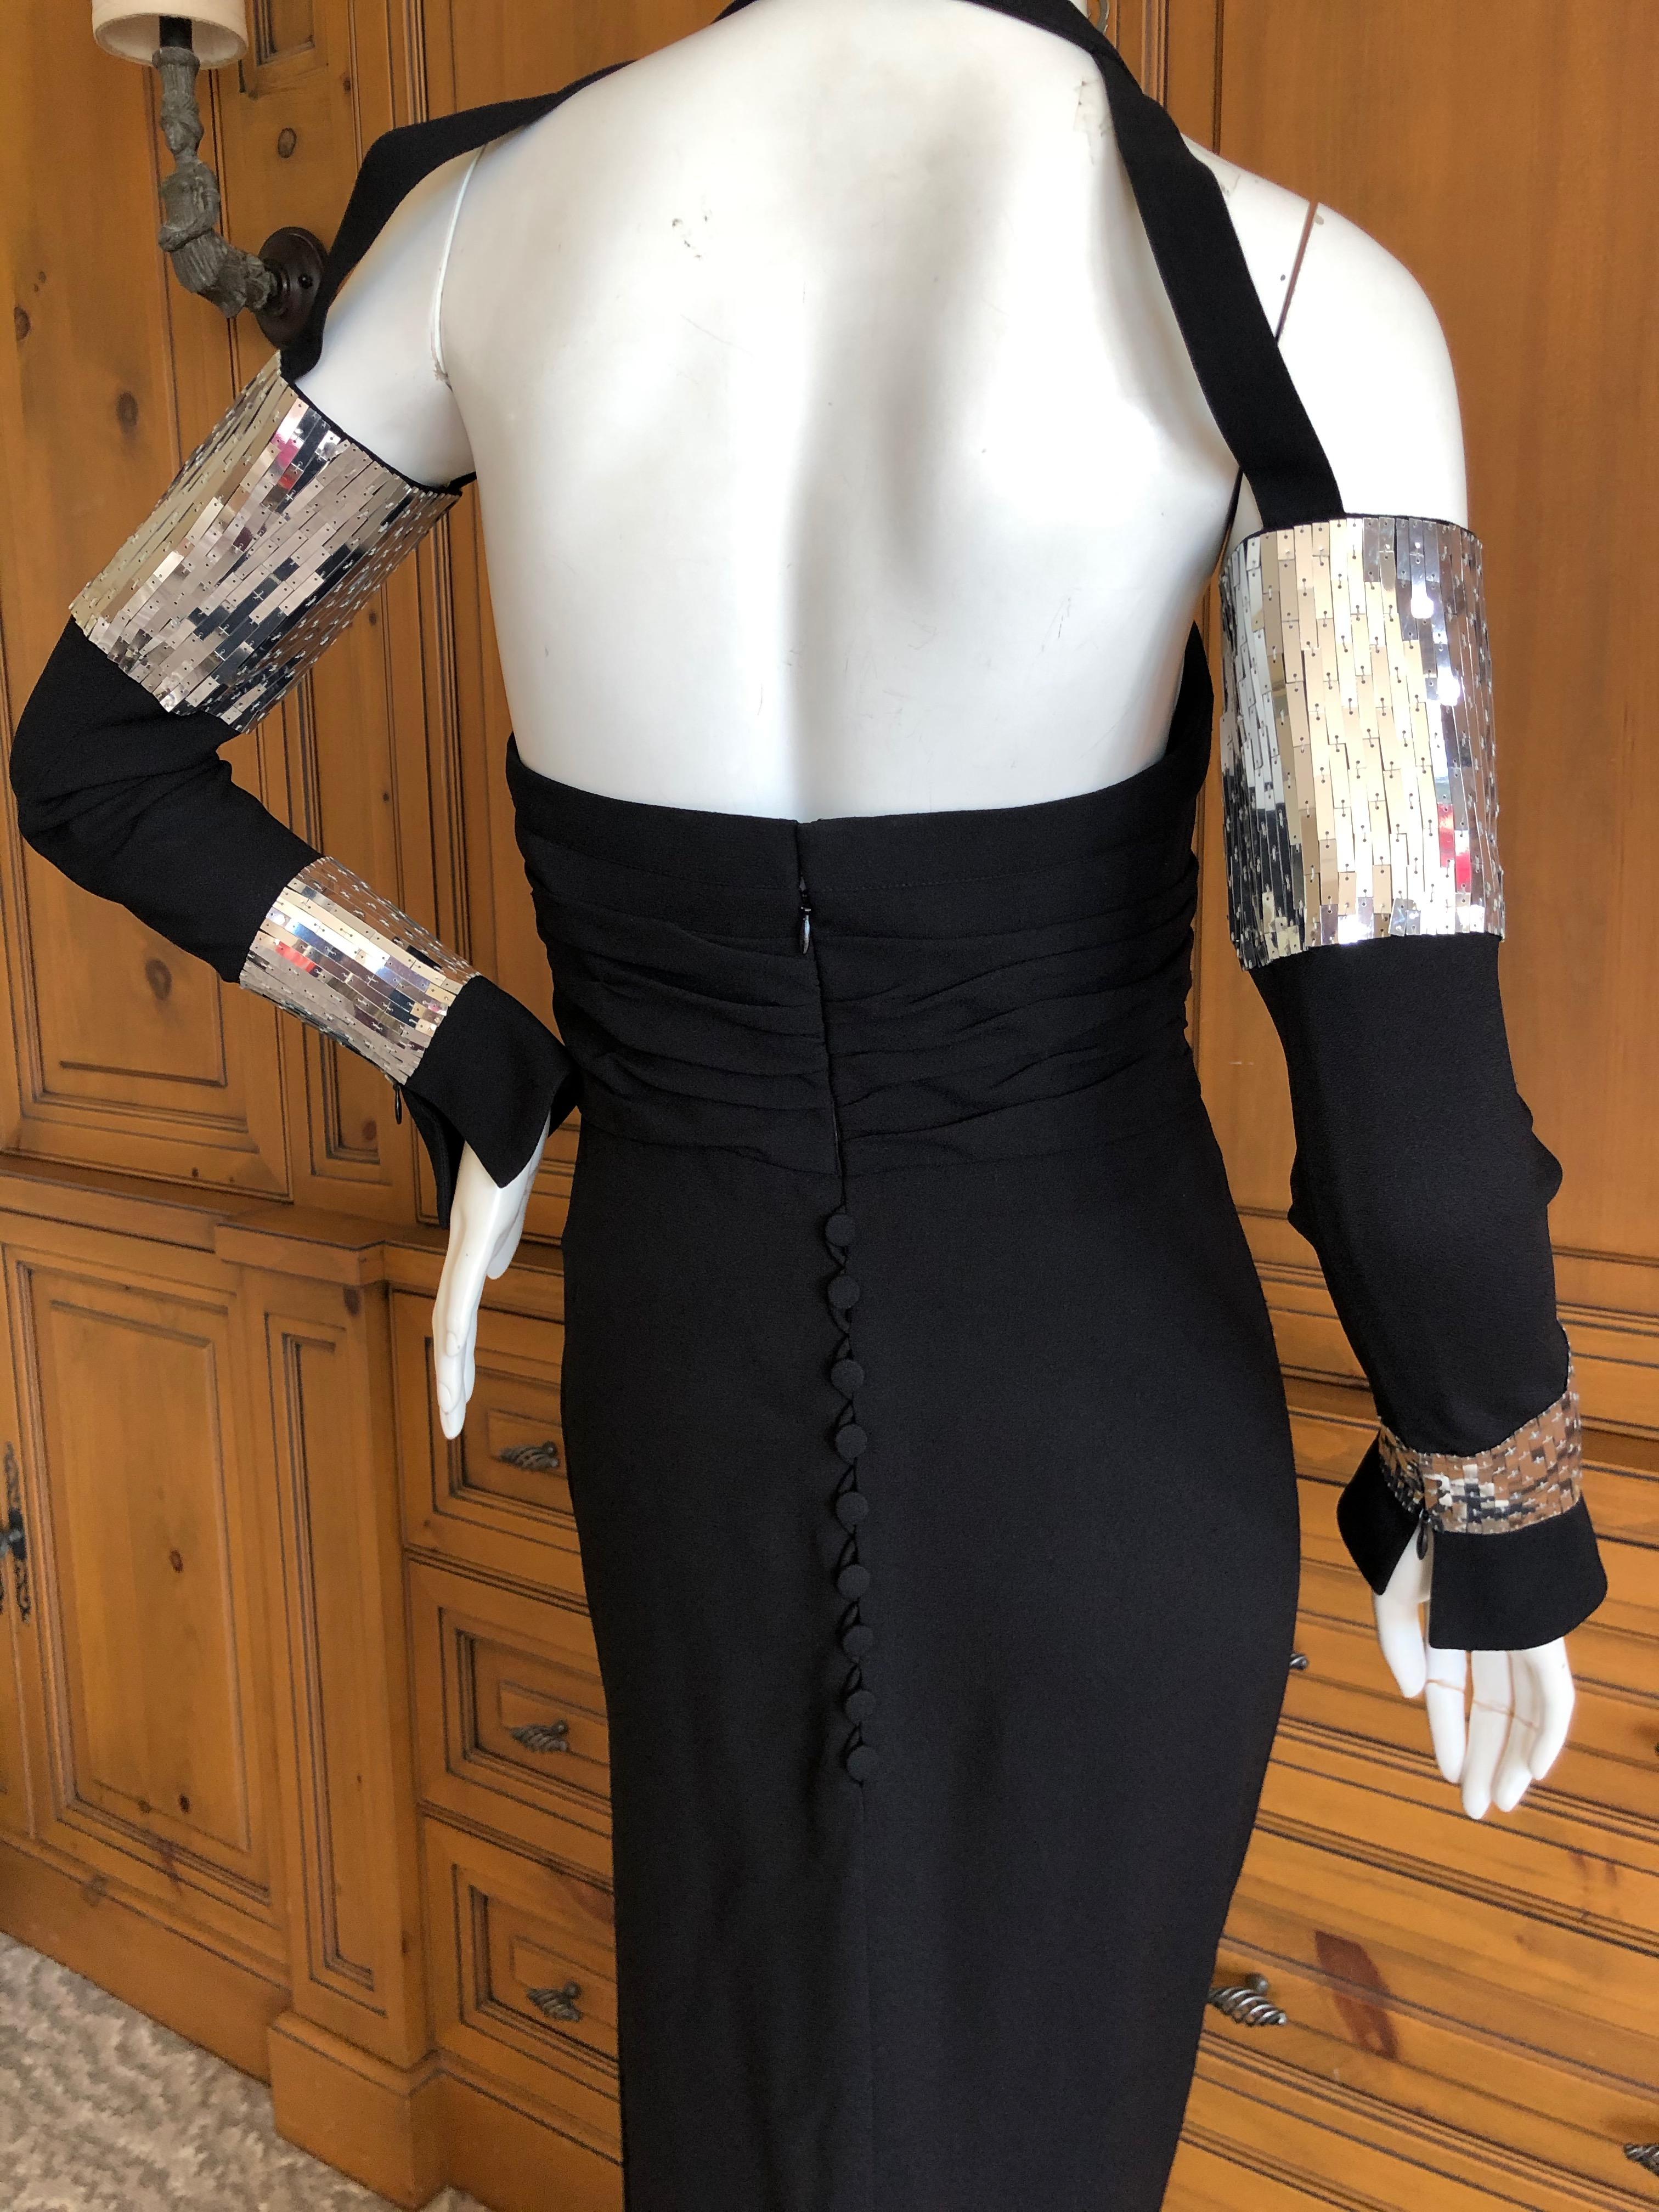 Karl Lagerfeld 1984 Evening Dress with Sequin Sleeves Attached by Bondage Straps For Sale 1